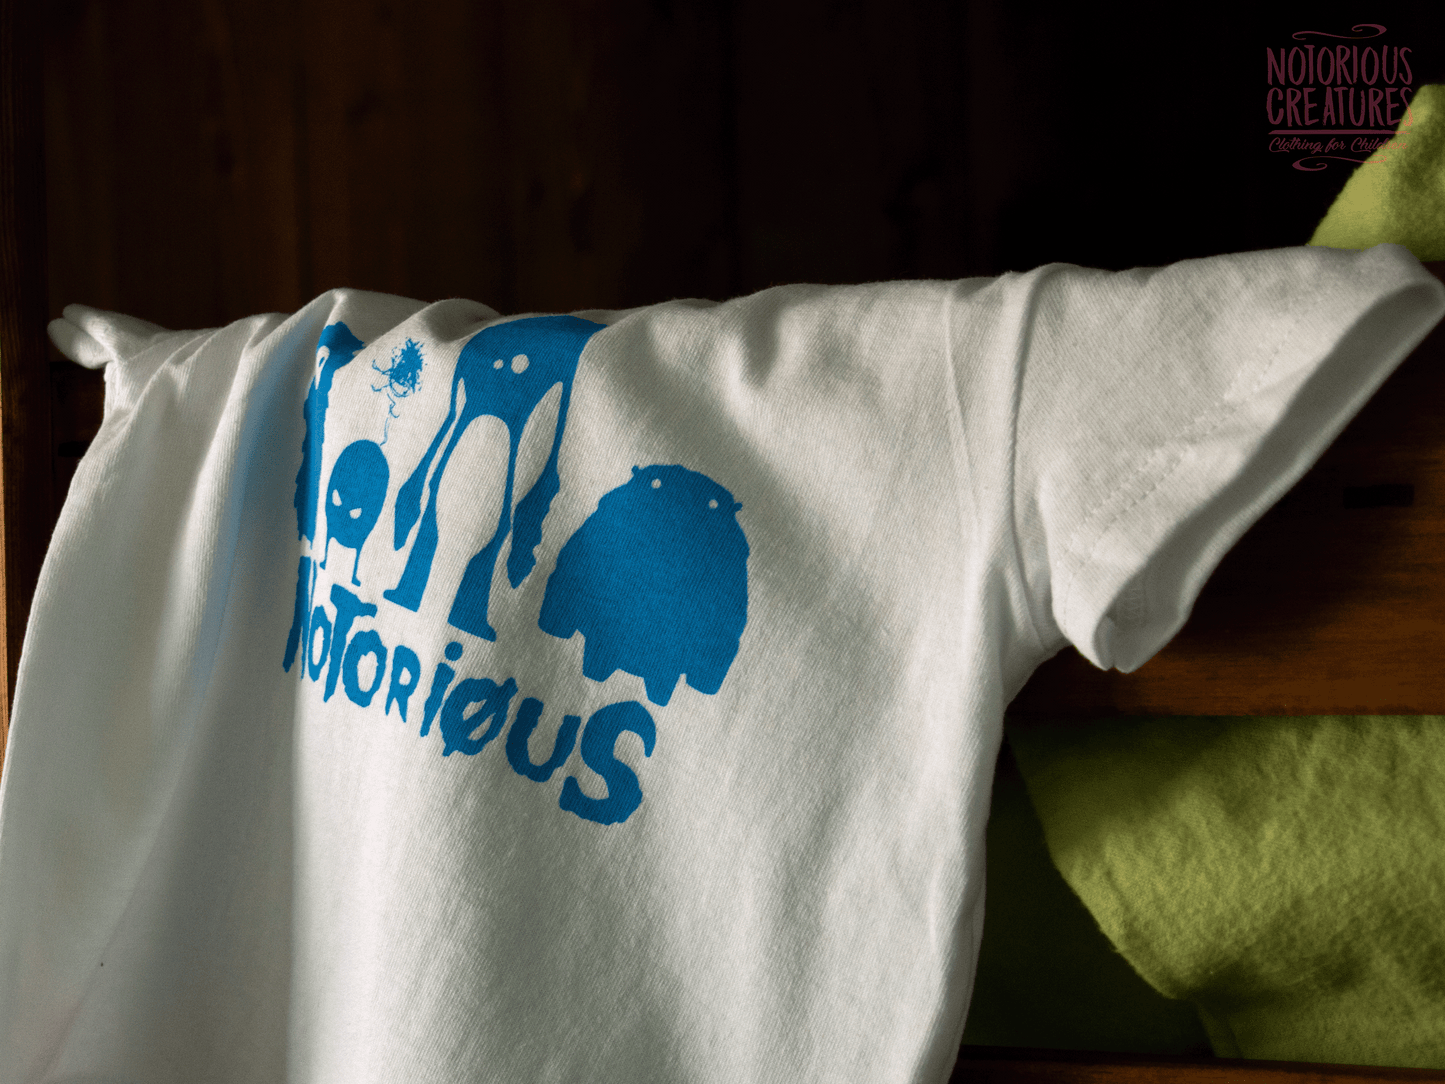 "THE USUAL SUSPECTS" - Blue | White Cotton | Toddler Tee